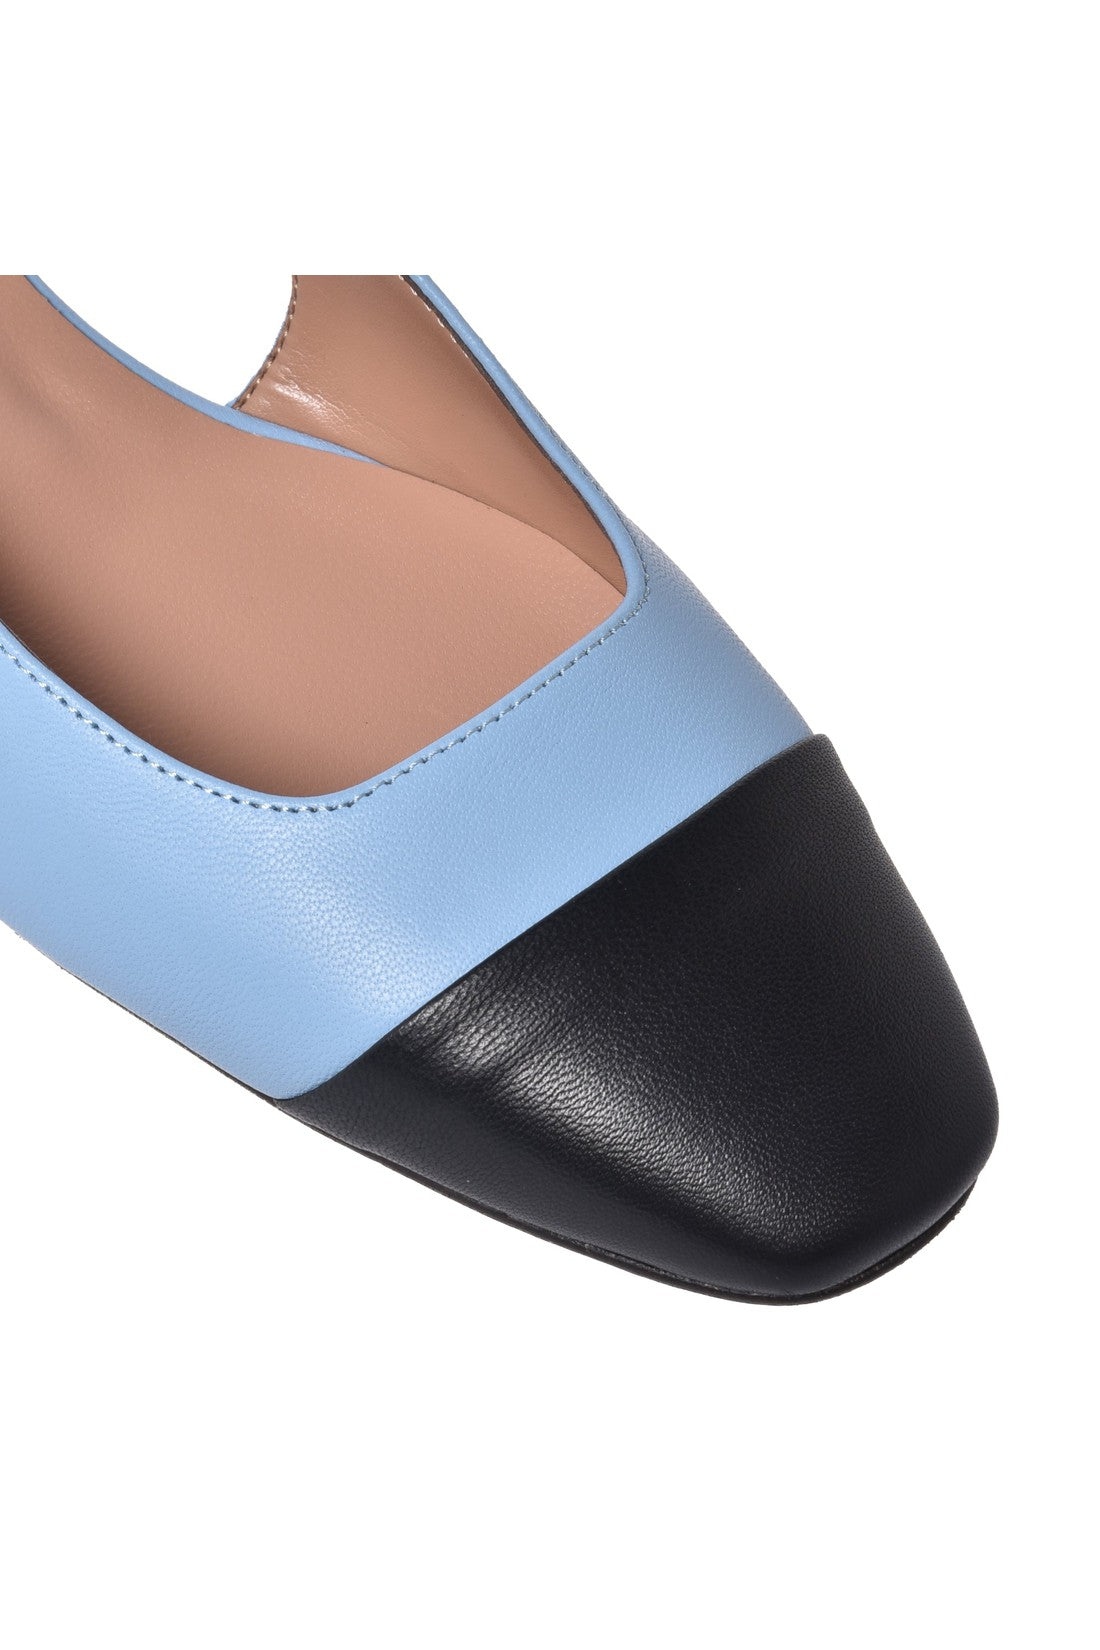 BALDININI-OUTLET-SALE-Ballerina-pump-in-black-and-light-blue-nappa-leather-Halbschuhe-ARCHIVE-COLLECTION-4.jpg